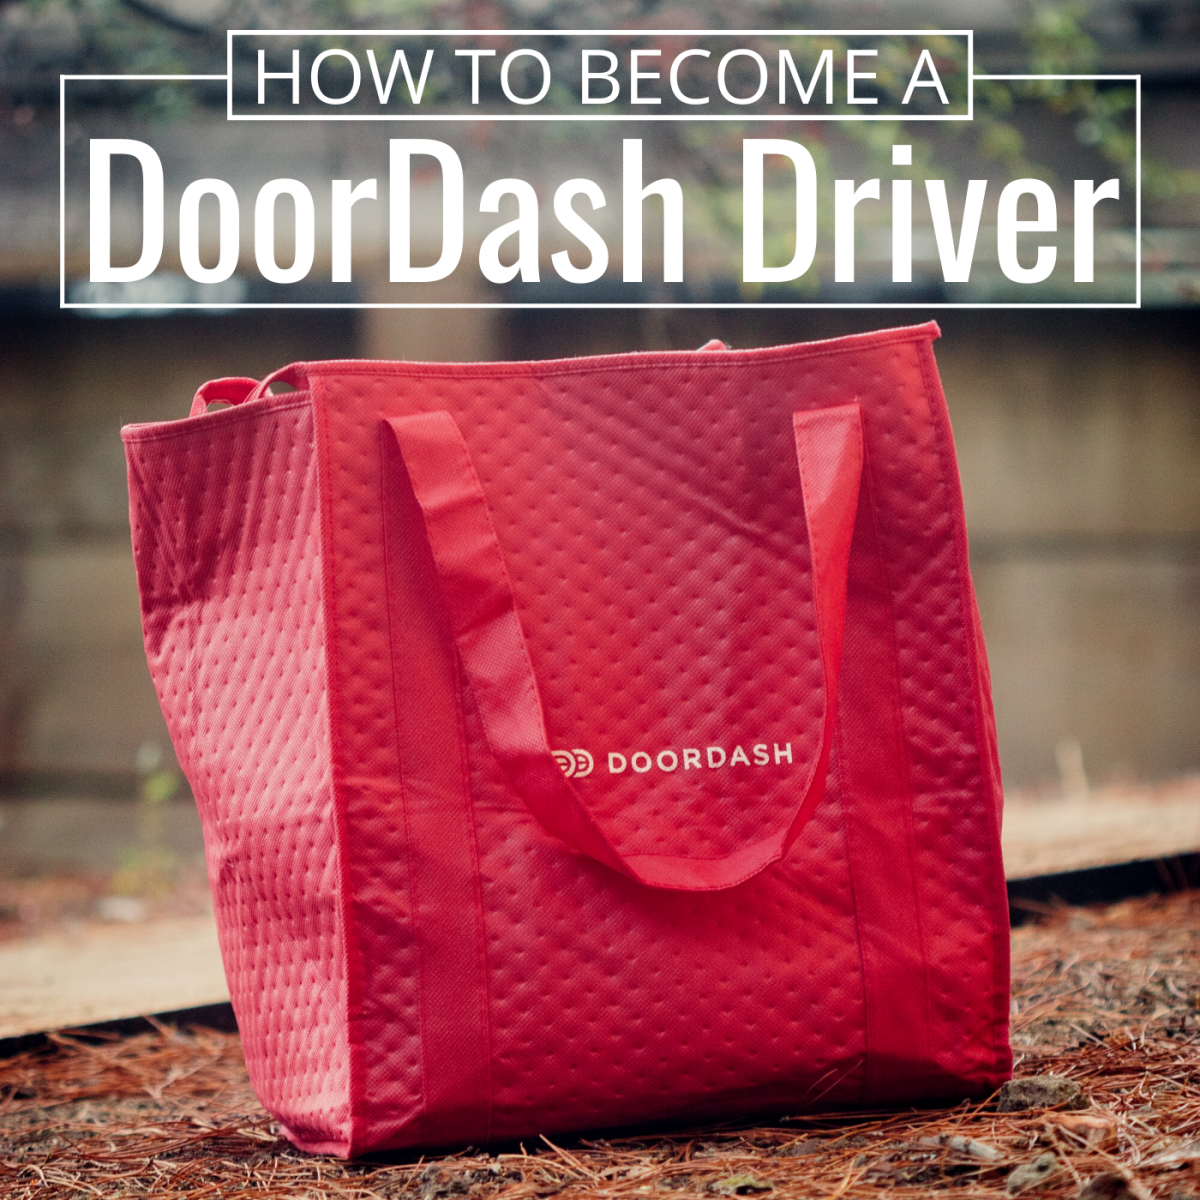 Thinking about driving for DoorDash? Here's everything you need to know. 